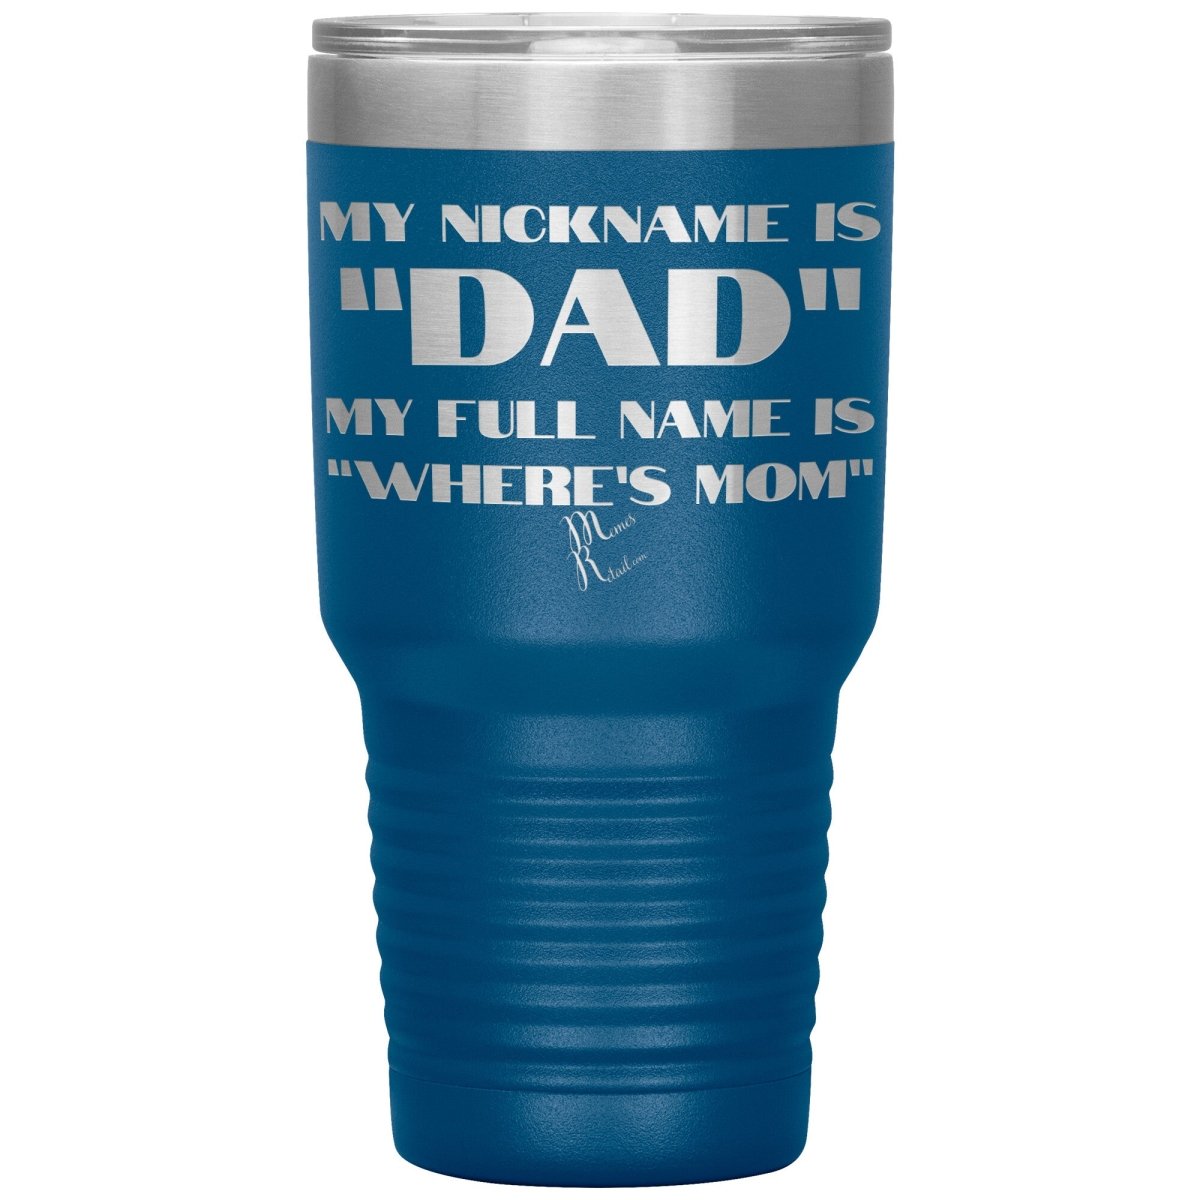 My Nickname is "Dad", My Full Name is "Where's Mom" Tumblers, 30oz Insulated Tumbler / Blue - MemesRetail.com